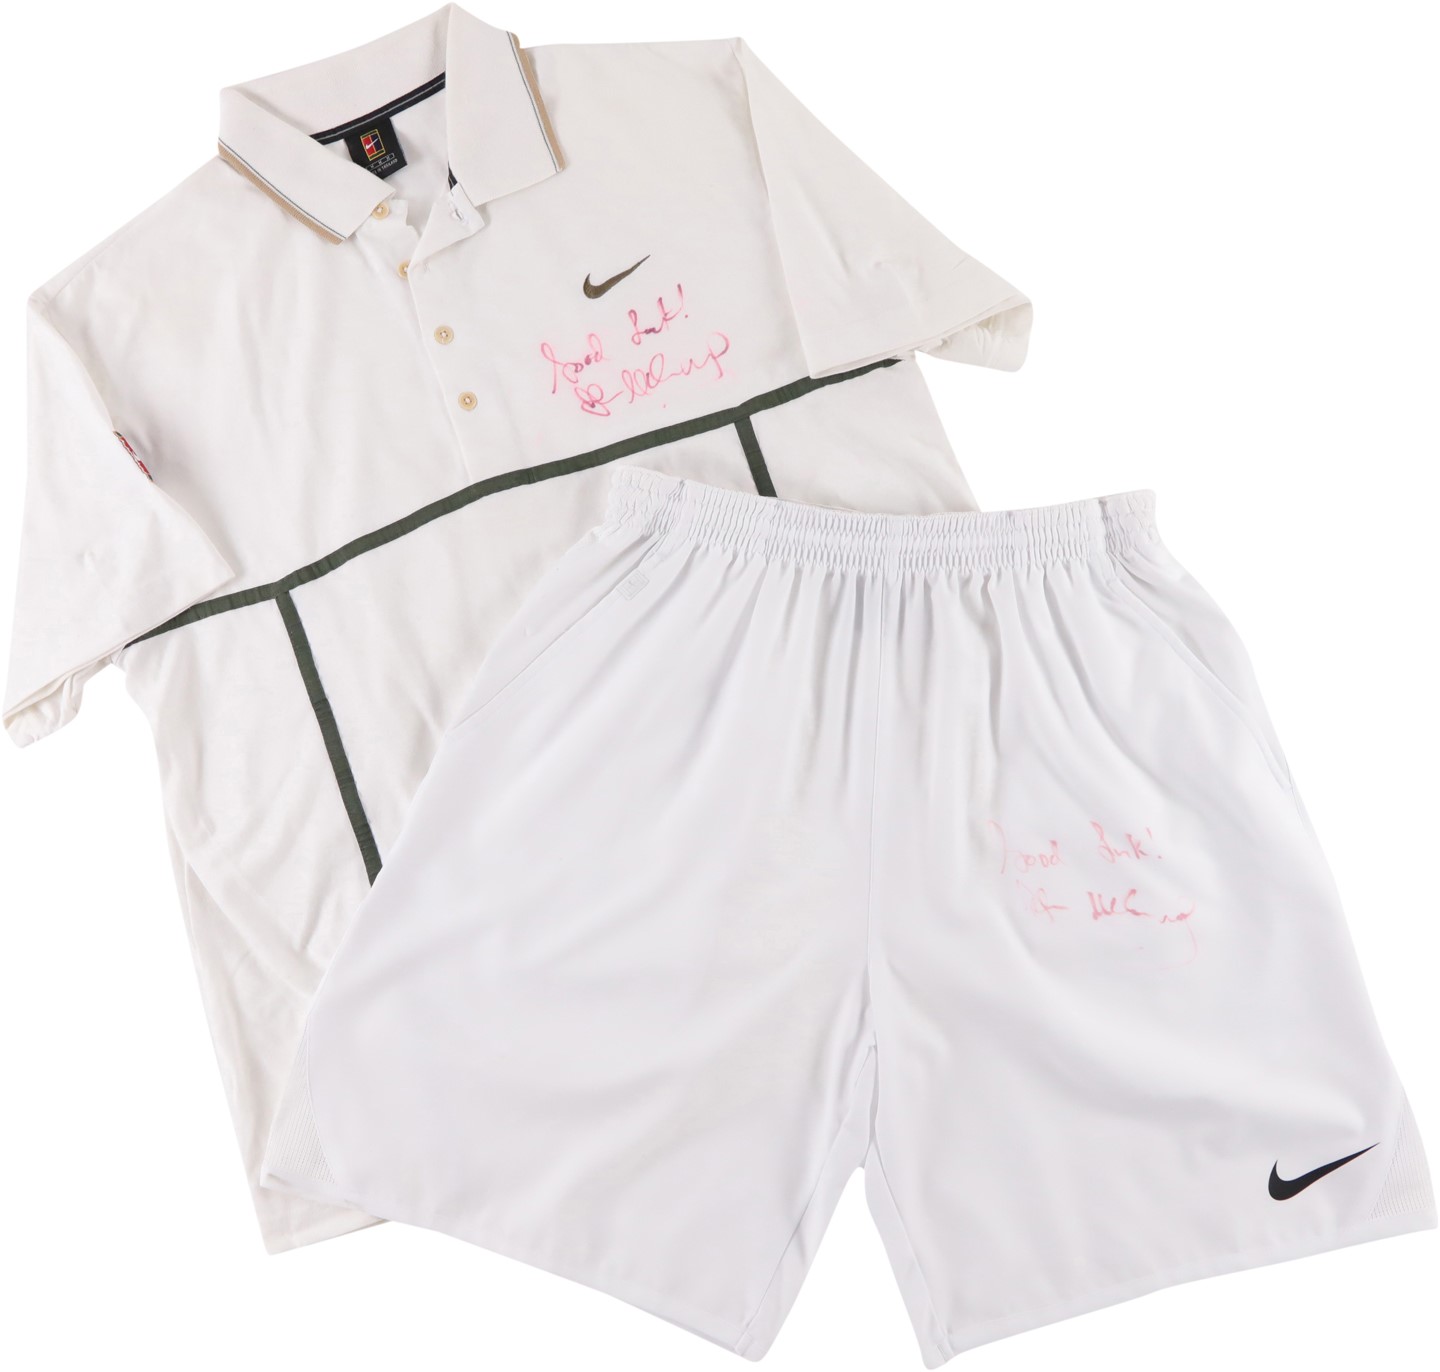 Olympics and All Sports - John McEnroe Signed Match Worn Shirt & Shorts Attributed to 2006 Champions Cup Naples Tournament (PSA)